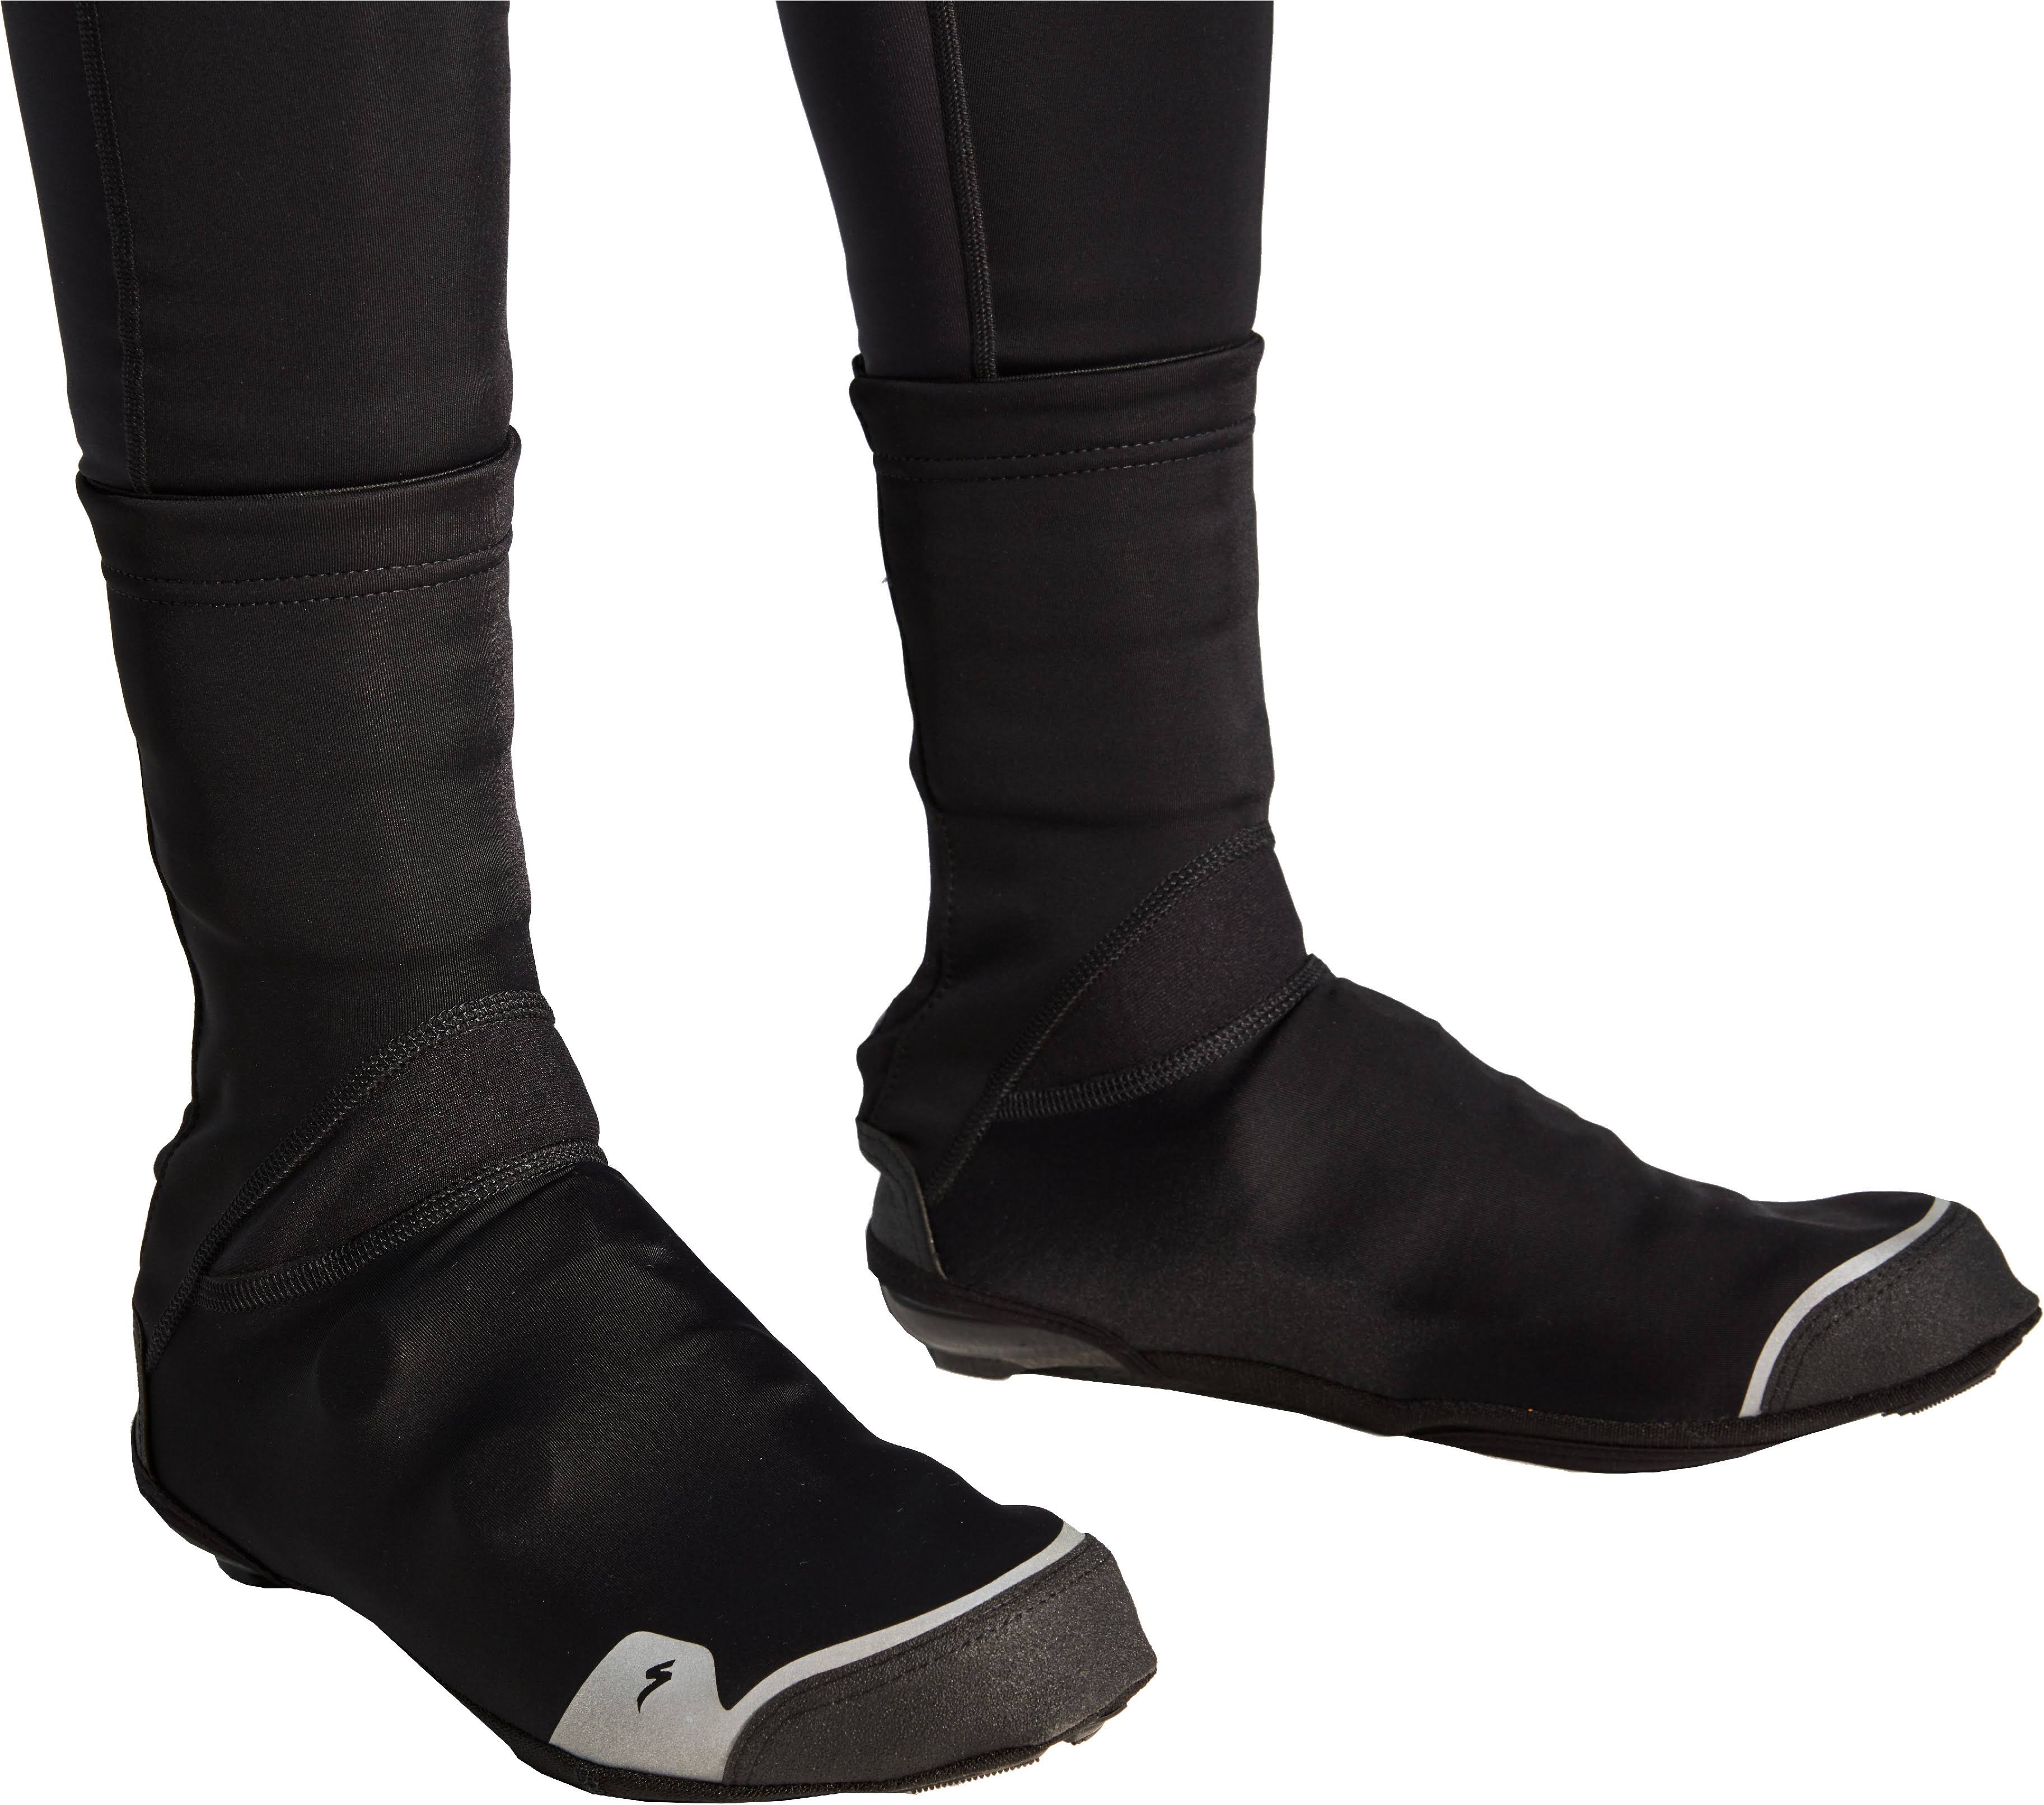 Specialized Element Shoe Covers - 41-42 - Black